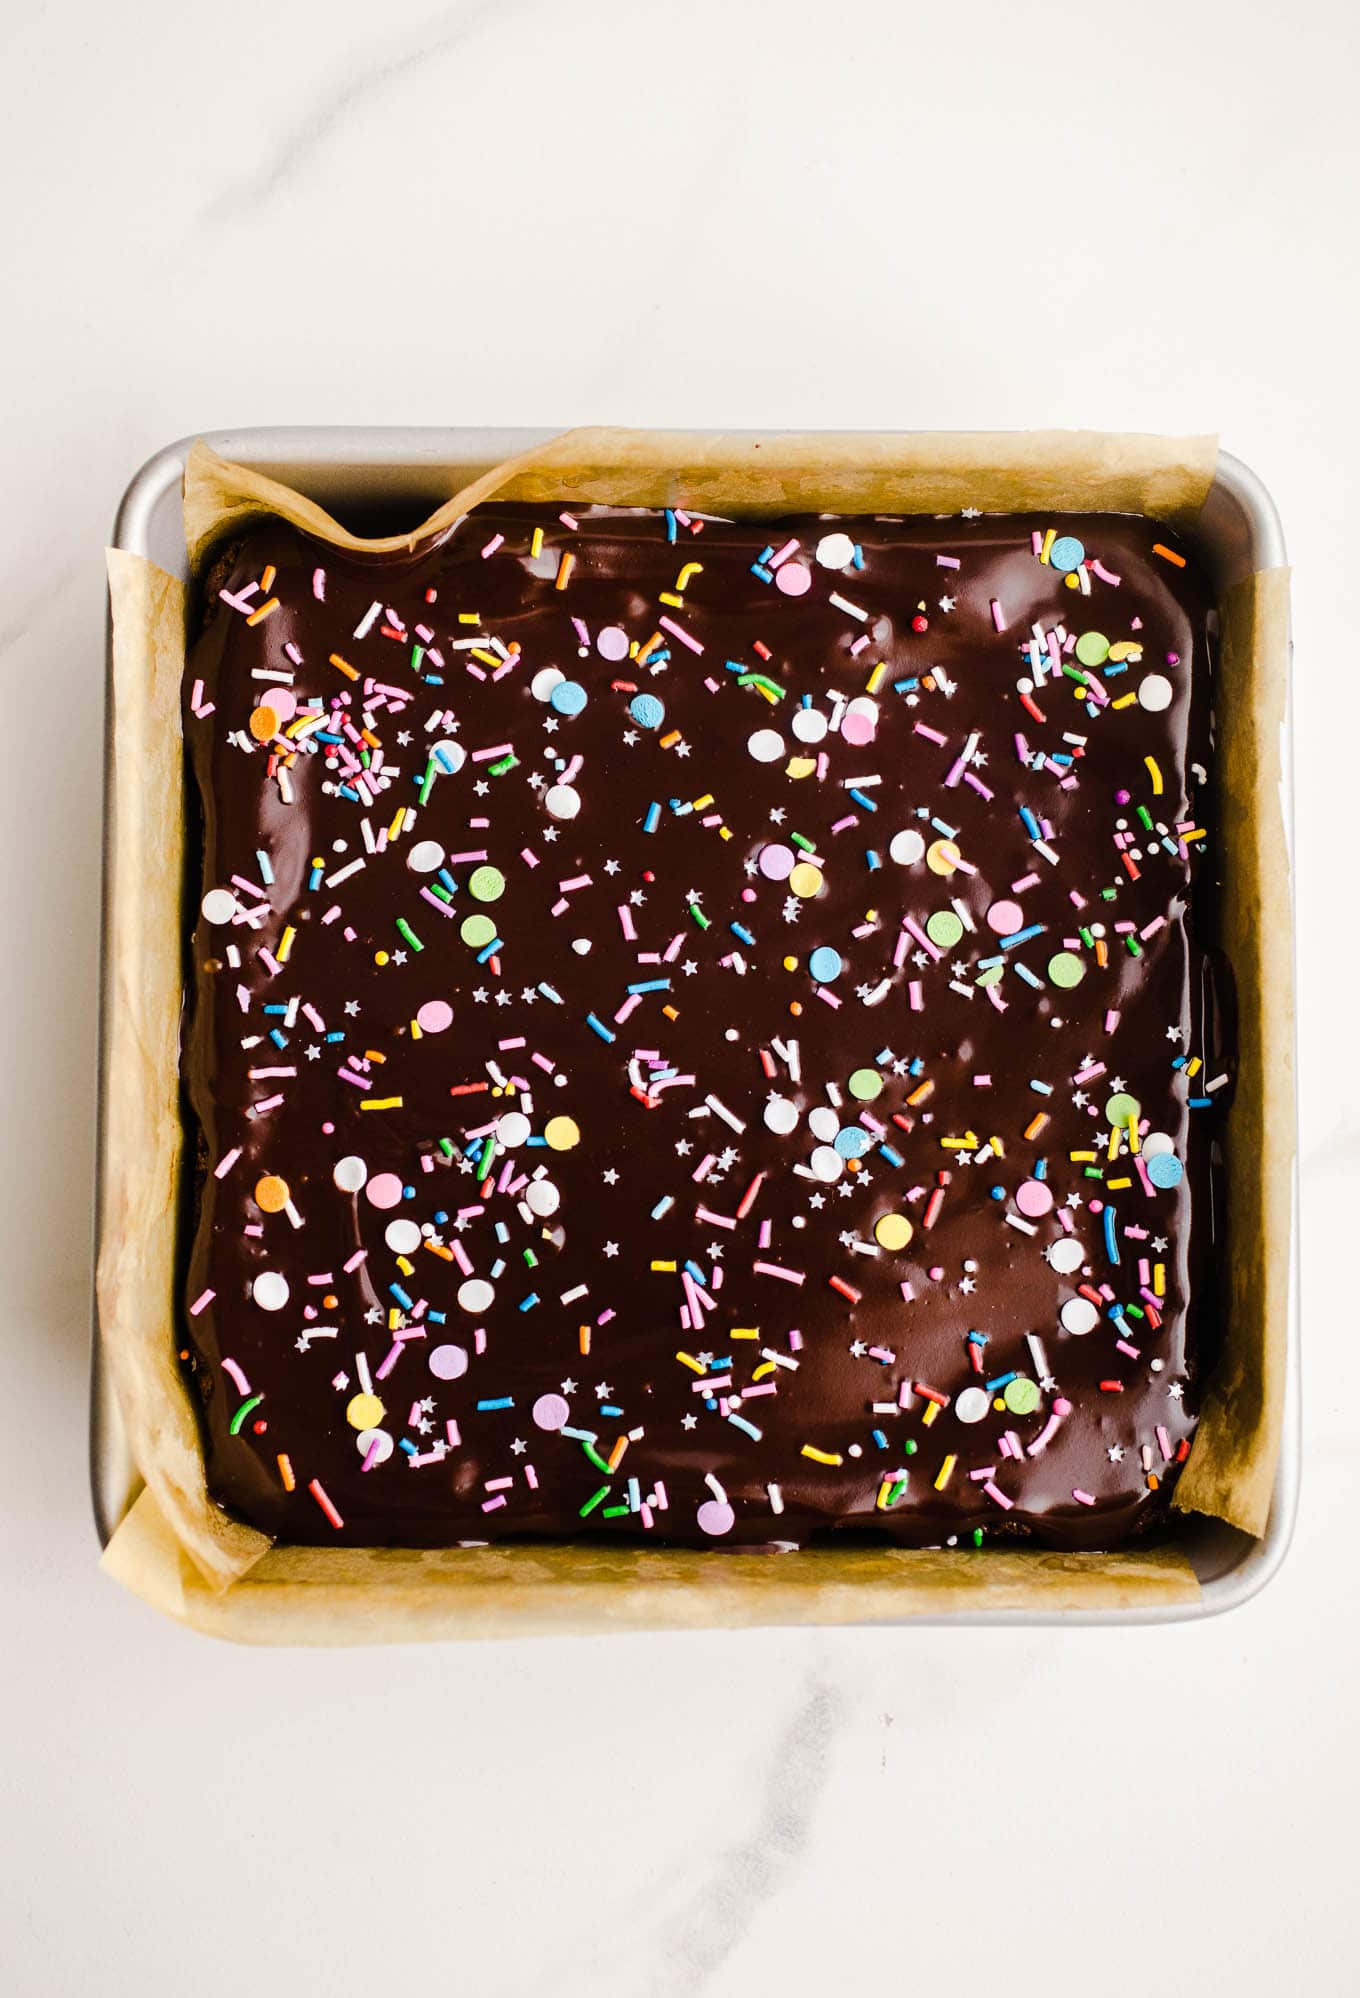 Cosmic brownies with chocolate ganache and sprinkles